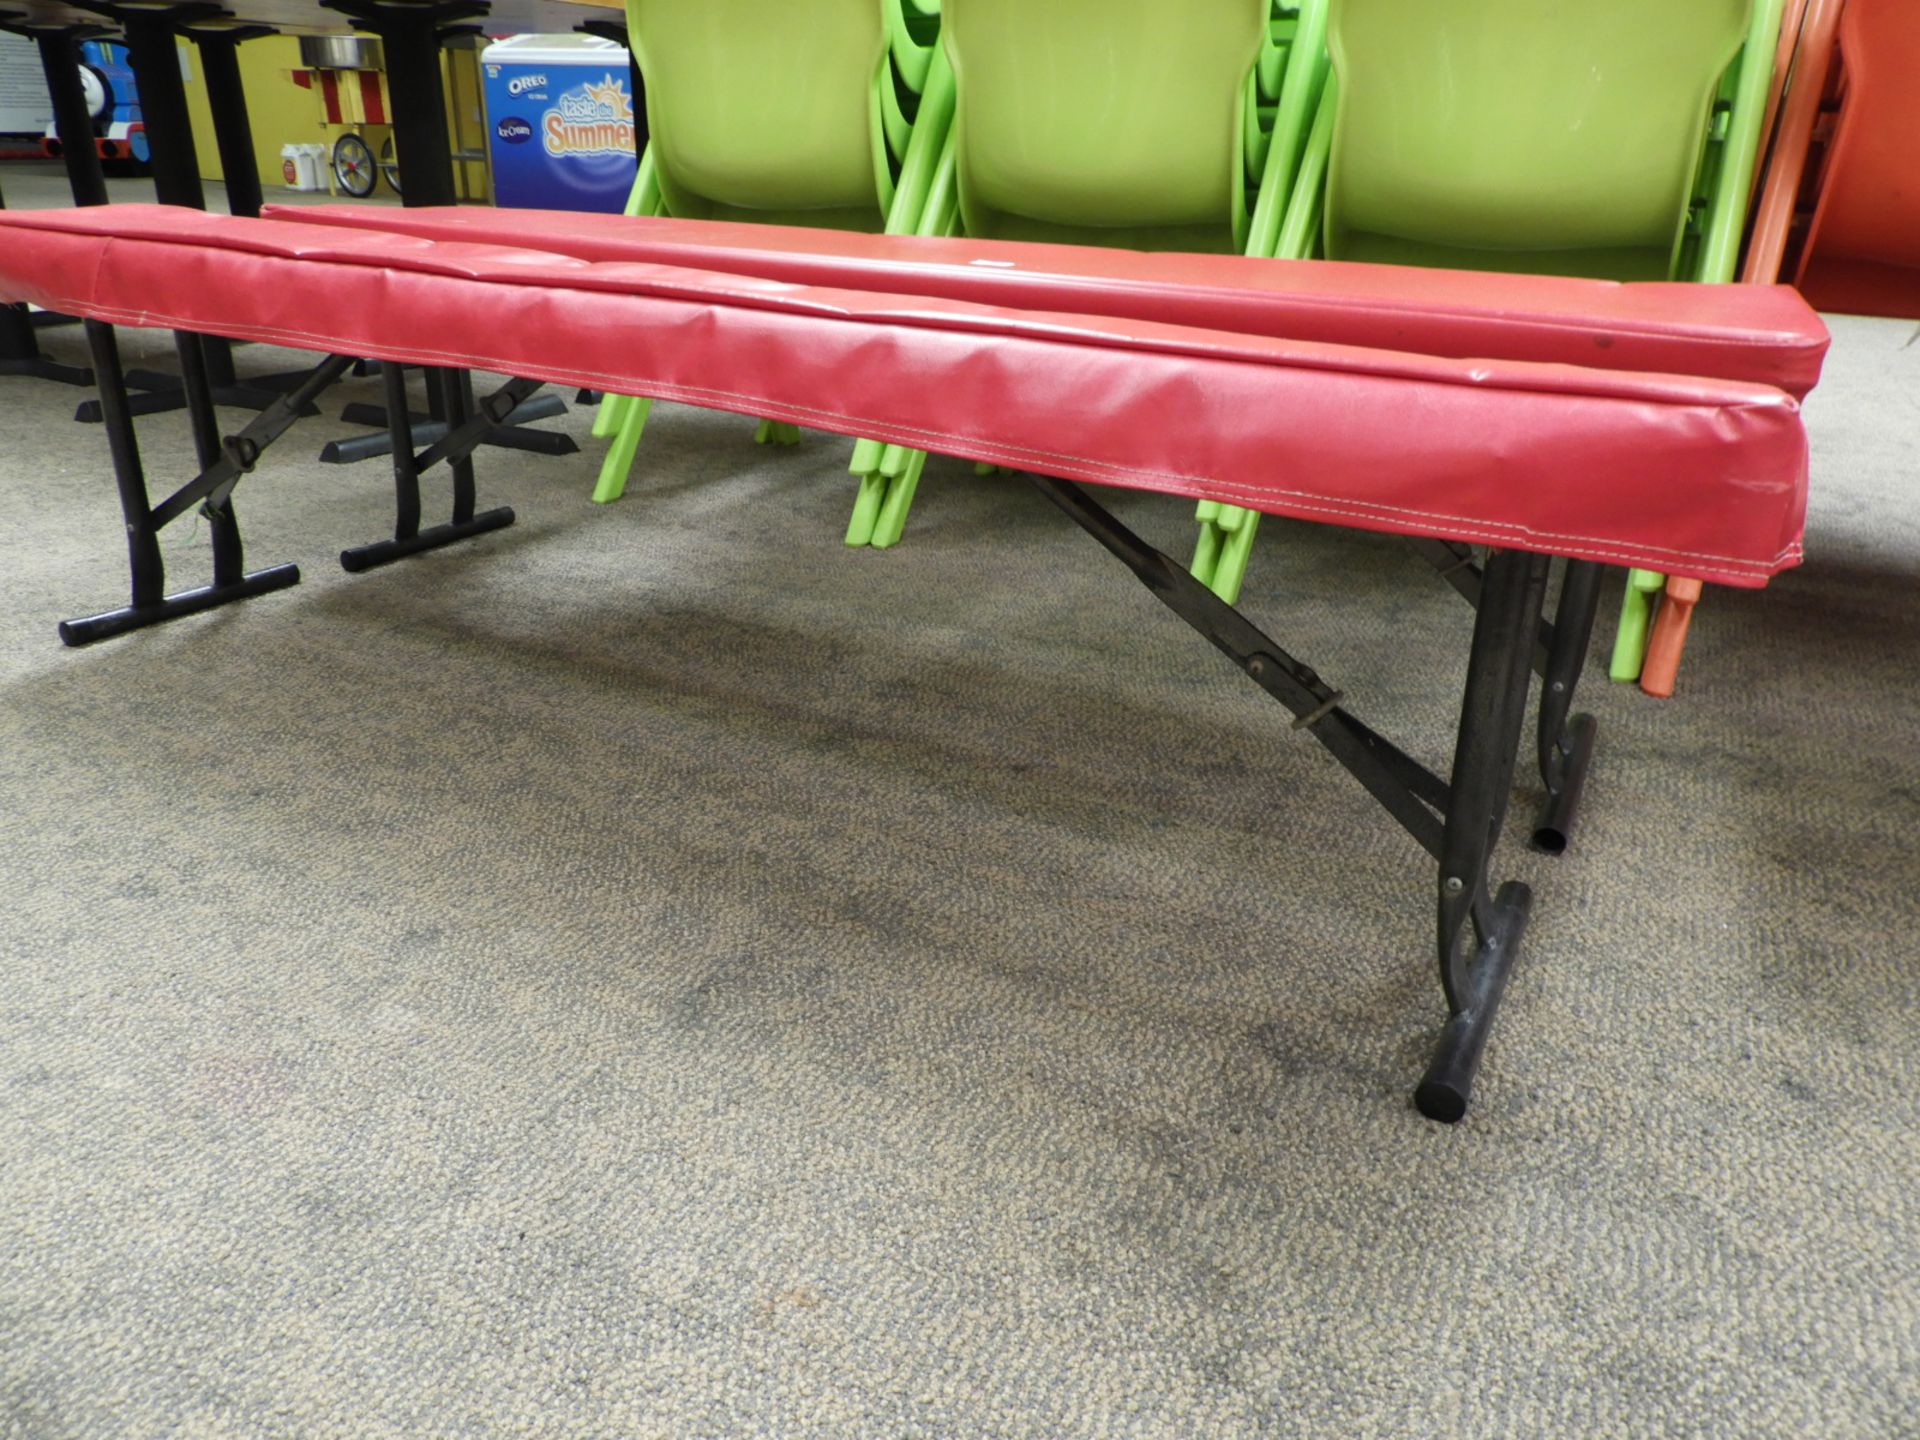 *Children's Party Bench with Folding Legs and Red Vinyl Top